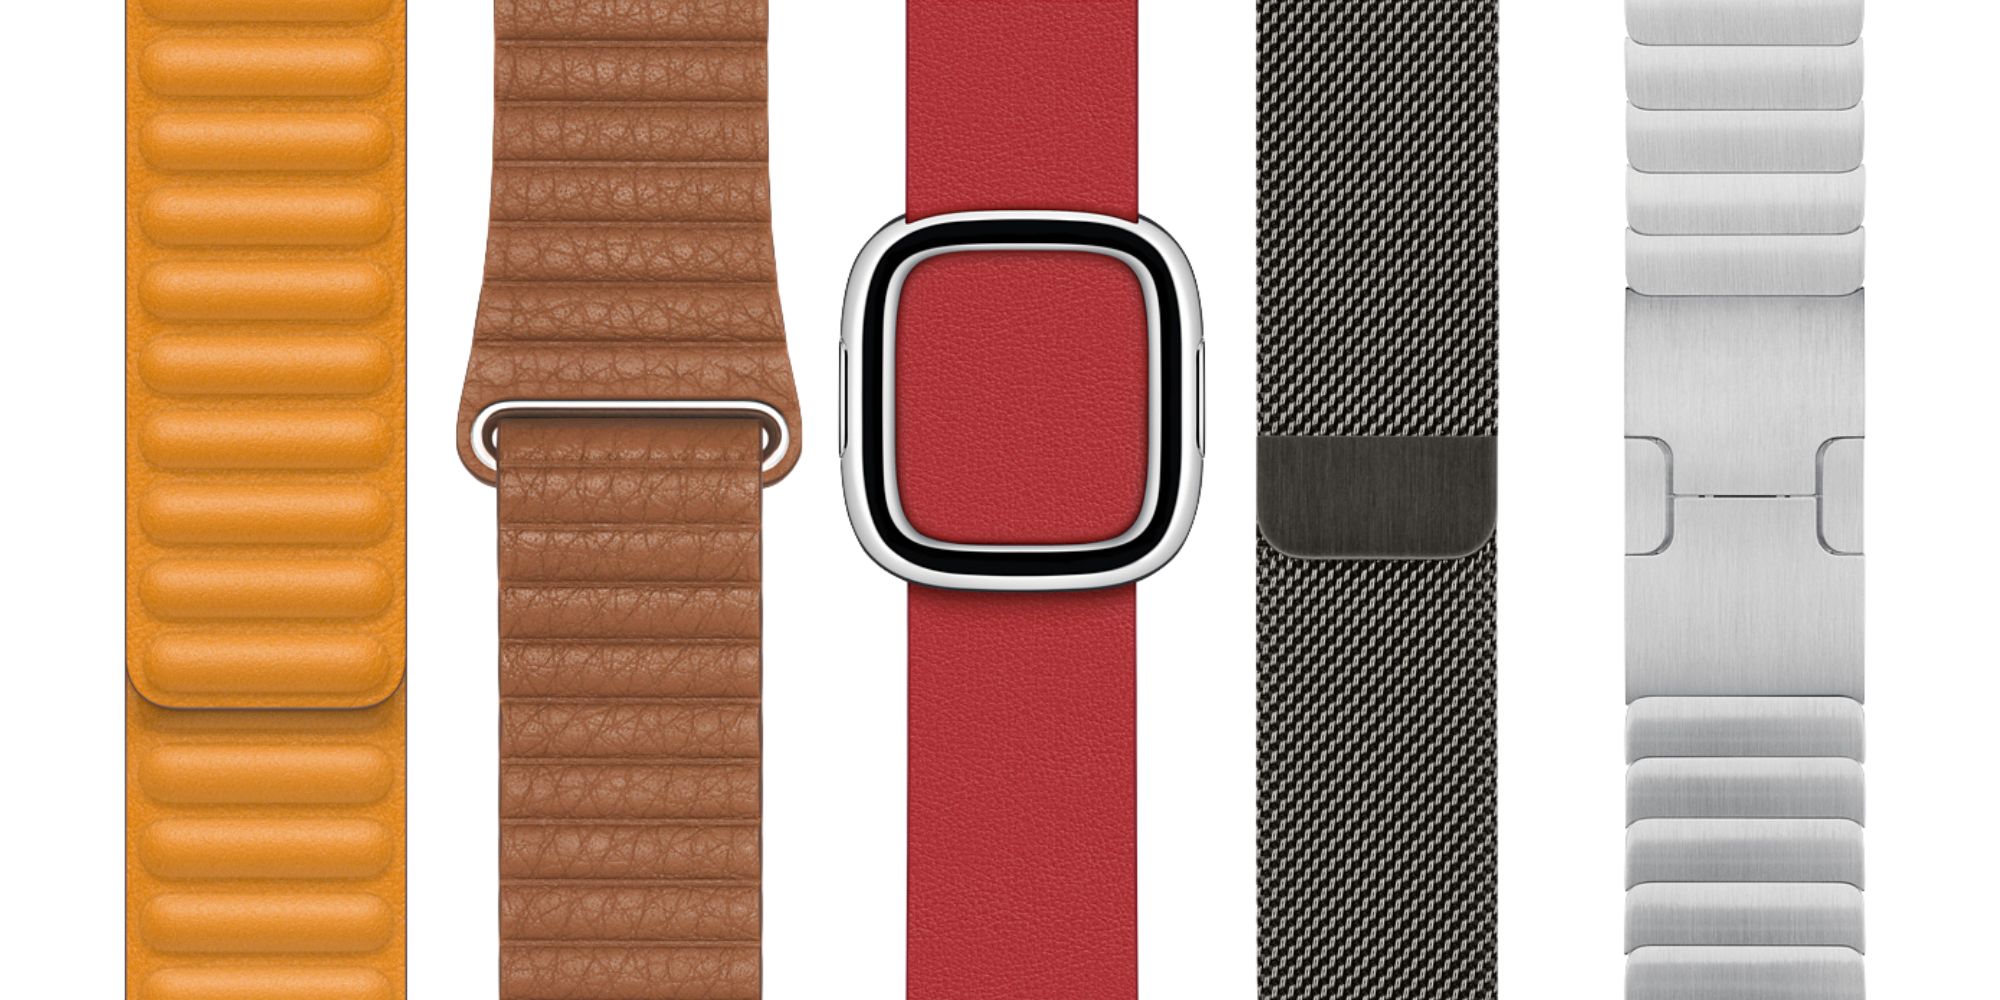 Leather and metal Apple Watch bands